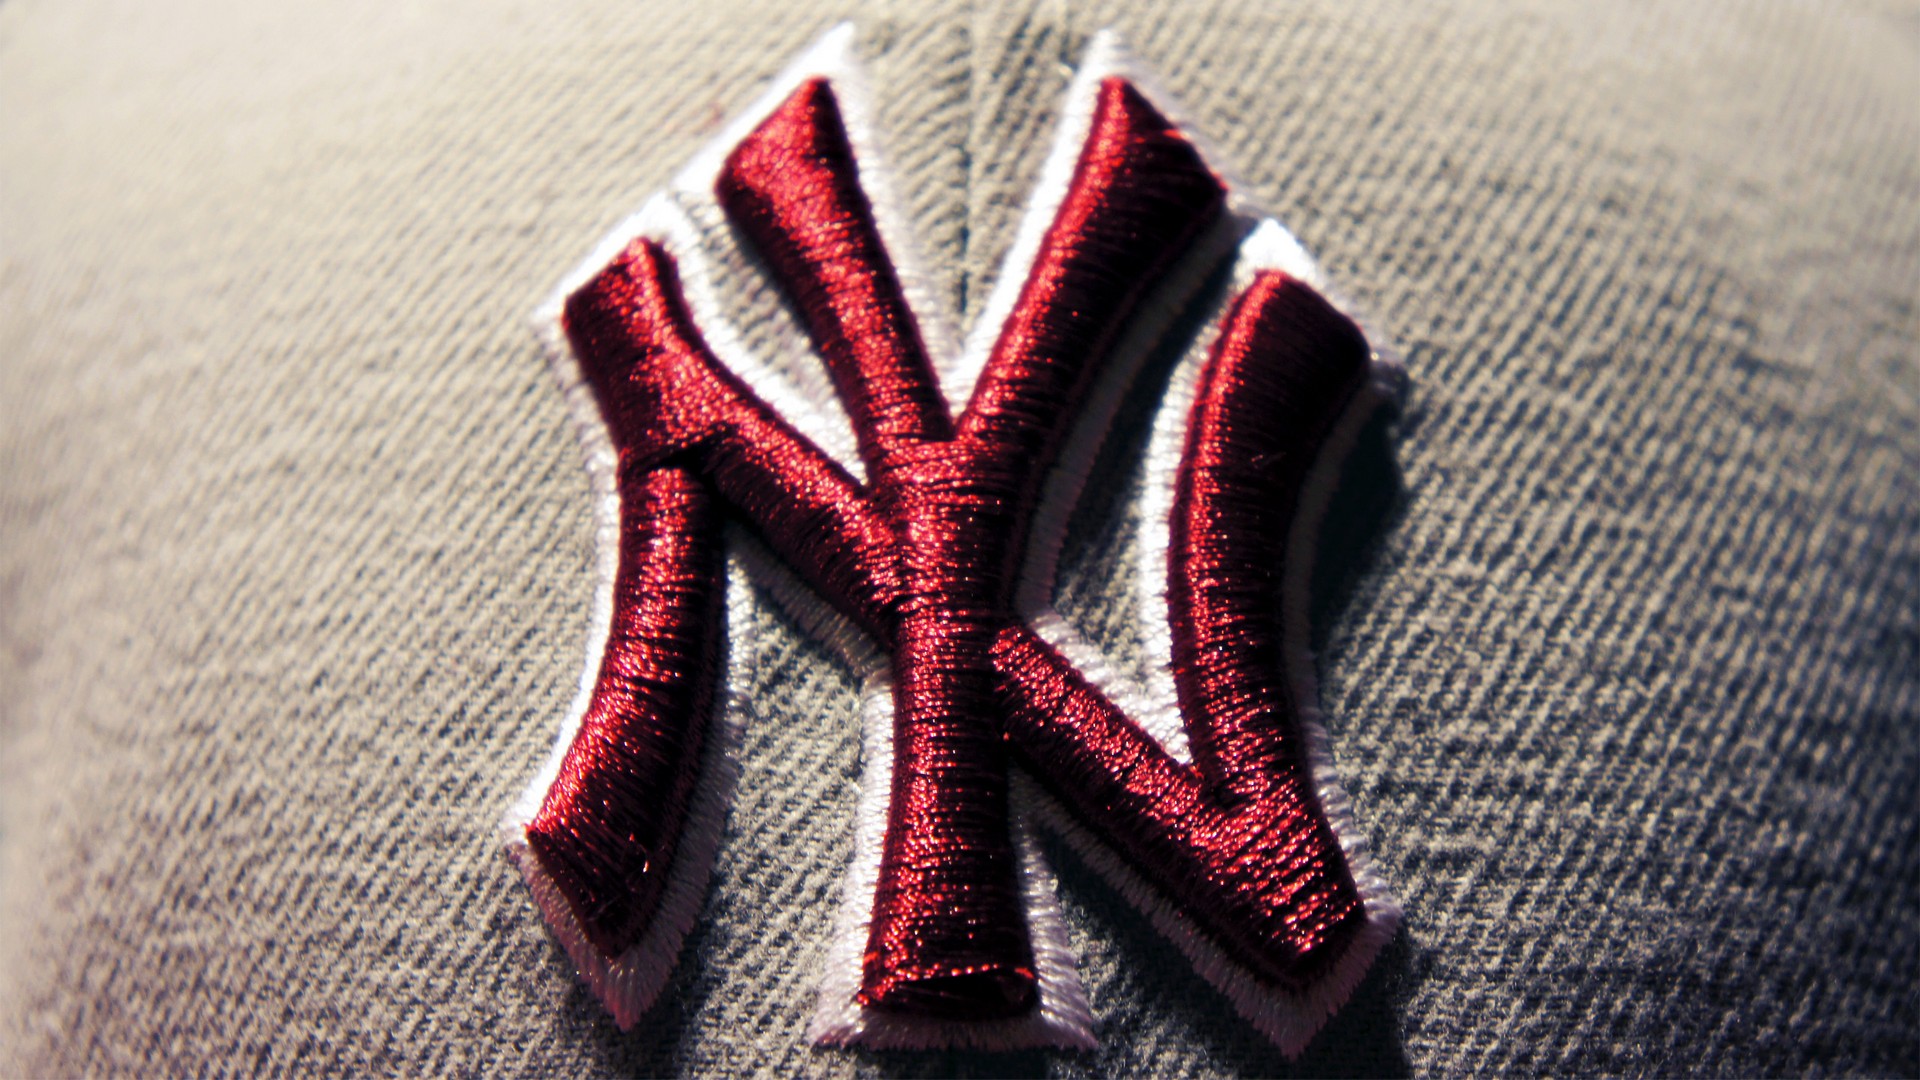 New York Yankees MLB For Desktop Wallpaper With high-resolution 1920X1080 pixel. You can use this wallpaper for Mac Desktop Wallpaper, Laptop Screensavers, Android Wallpapers, Tablet or iPhone Home Screen and another mobile phone device